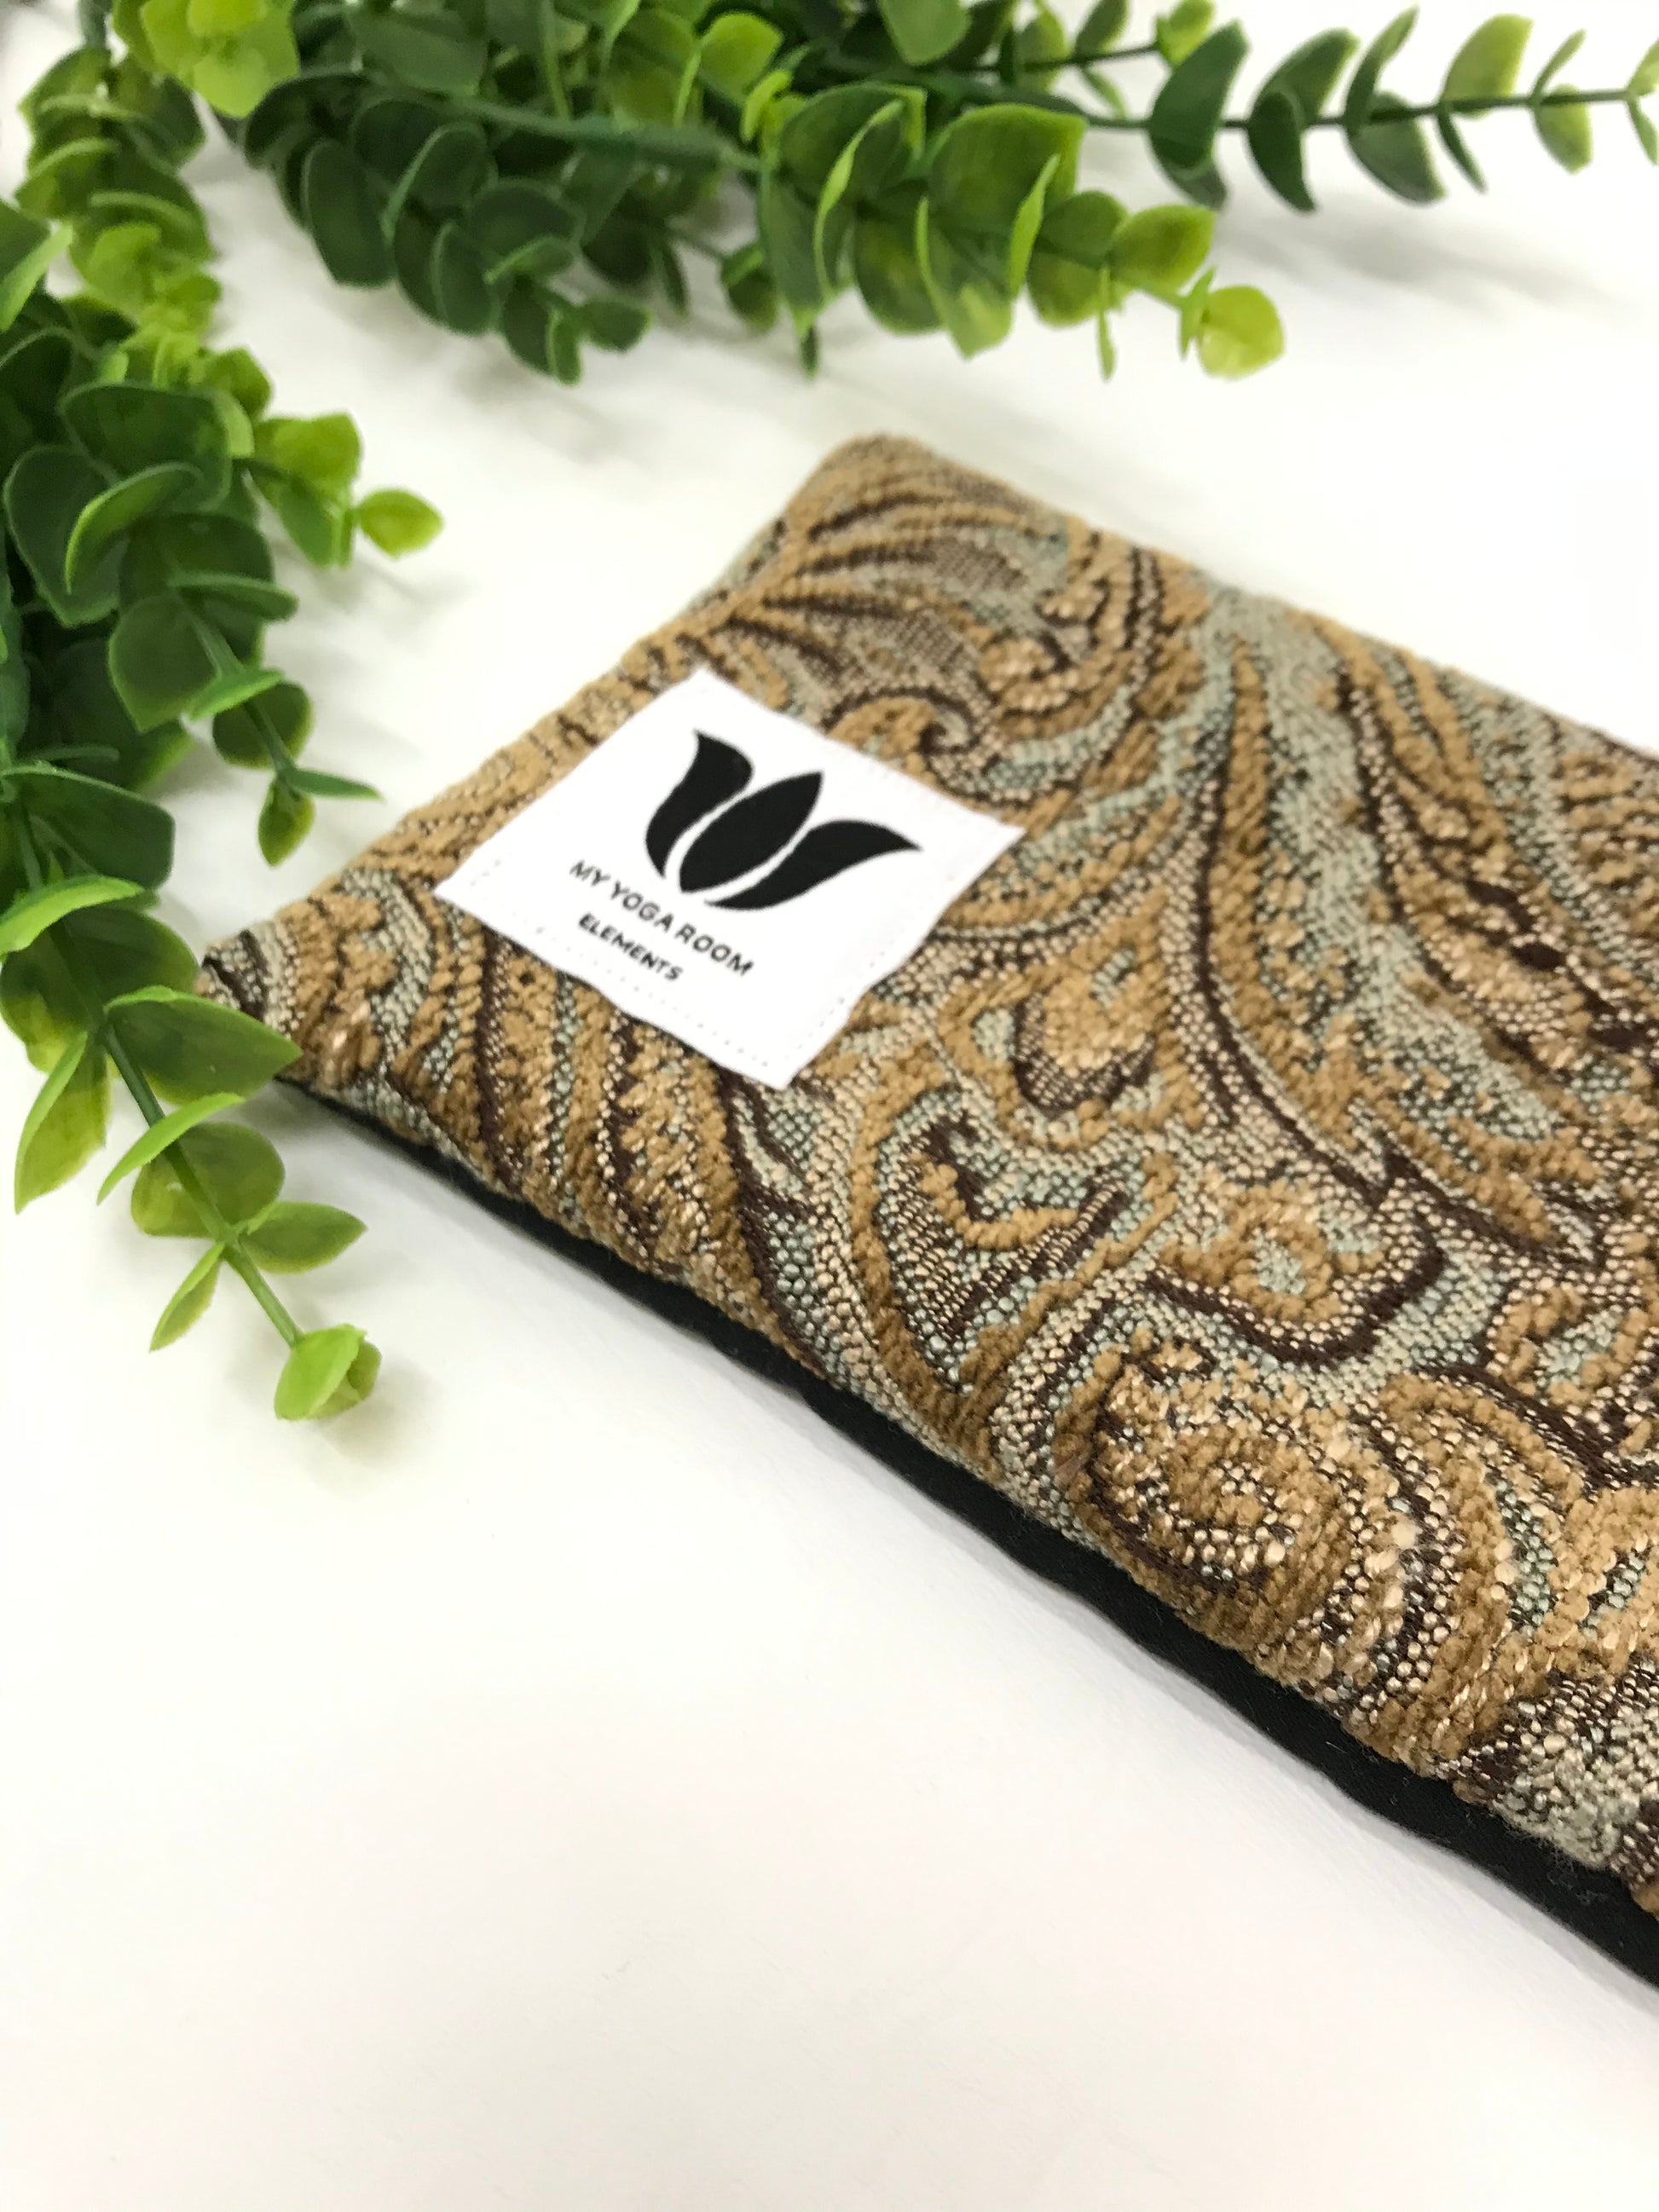 Yoga eye pillow, unscented, therapeutically weighted to soothe eye strain and stress or enhance your savasana. Handcrafted in Canada by My Yoga Room Elements. Brown plush paisley print and bamboo fabric.